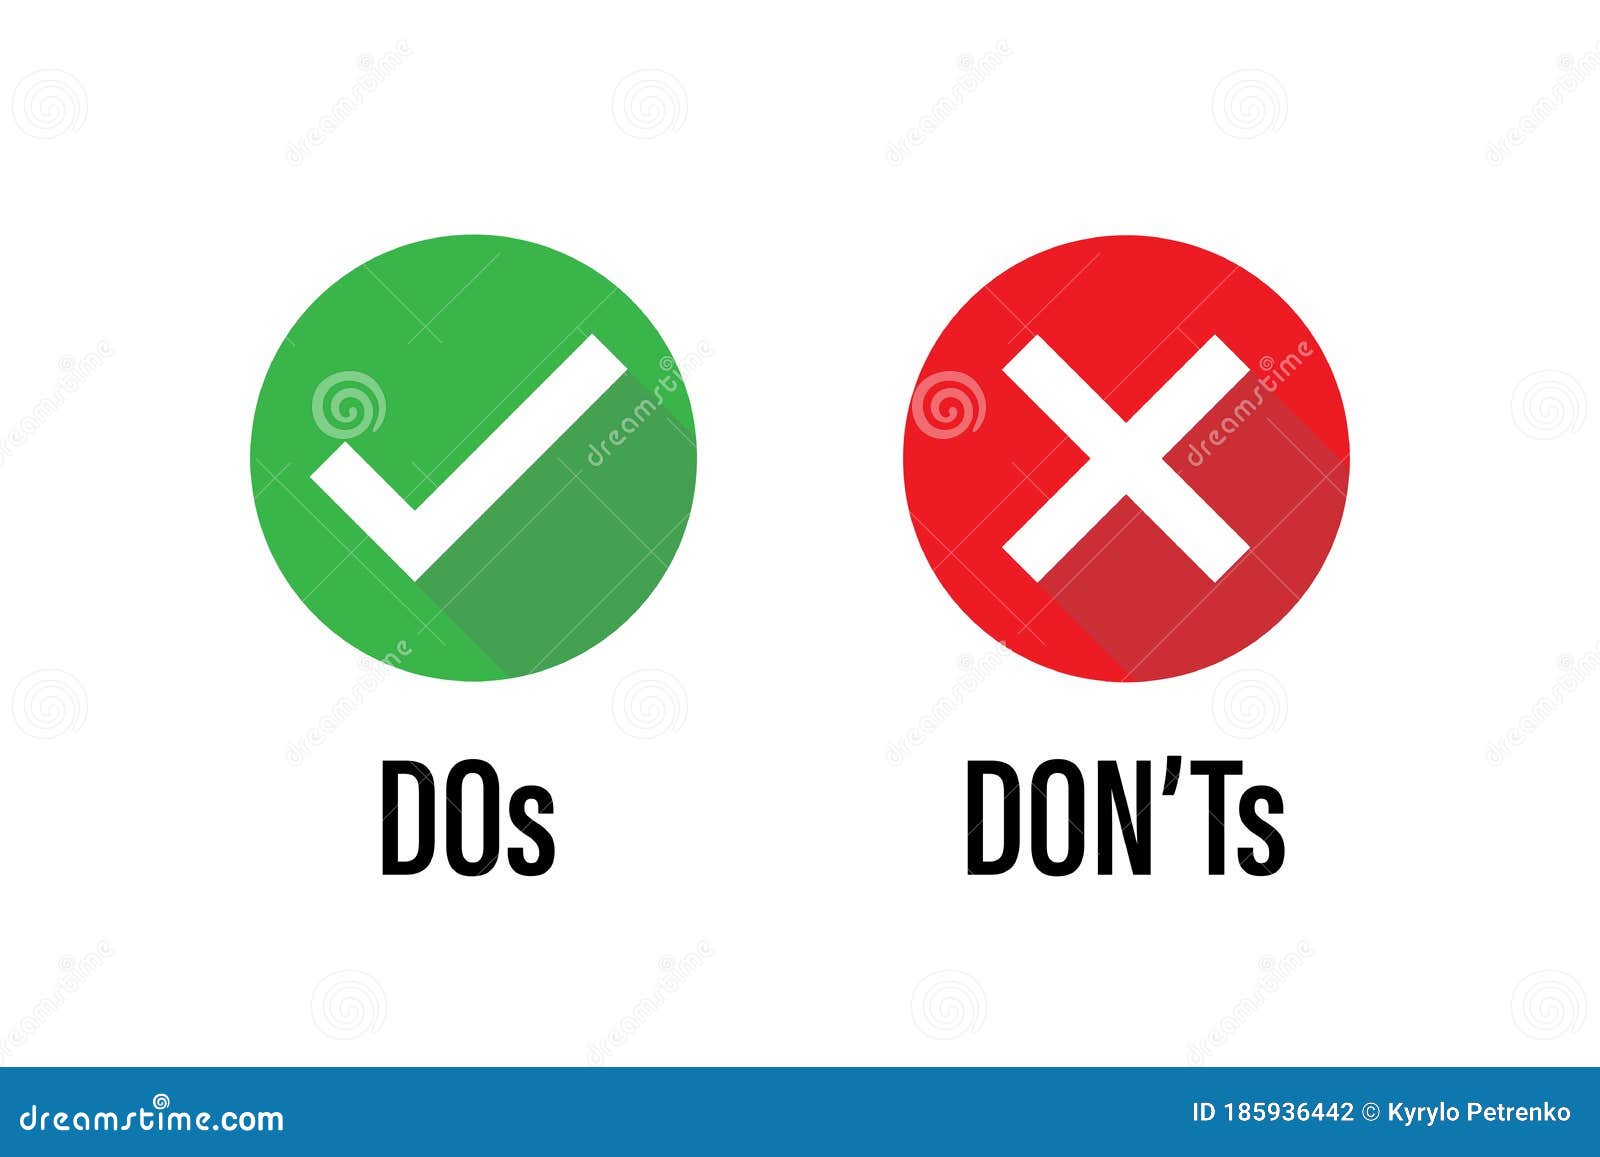 do dont icon. good true dos and bad false donts. like unlike error. green red circles on white backgrounds. okay fail sign. ok